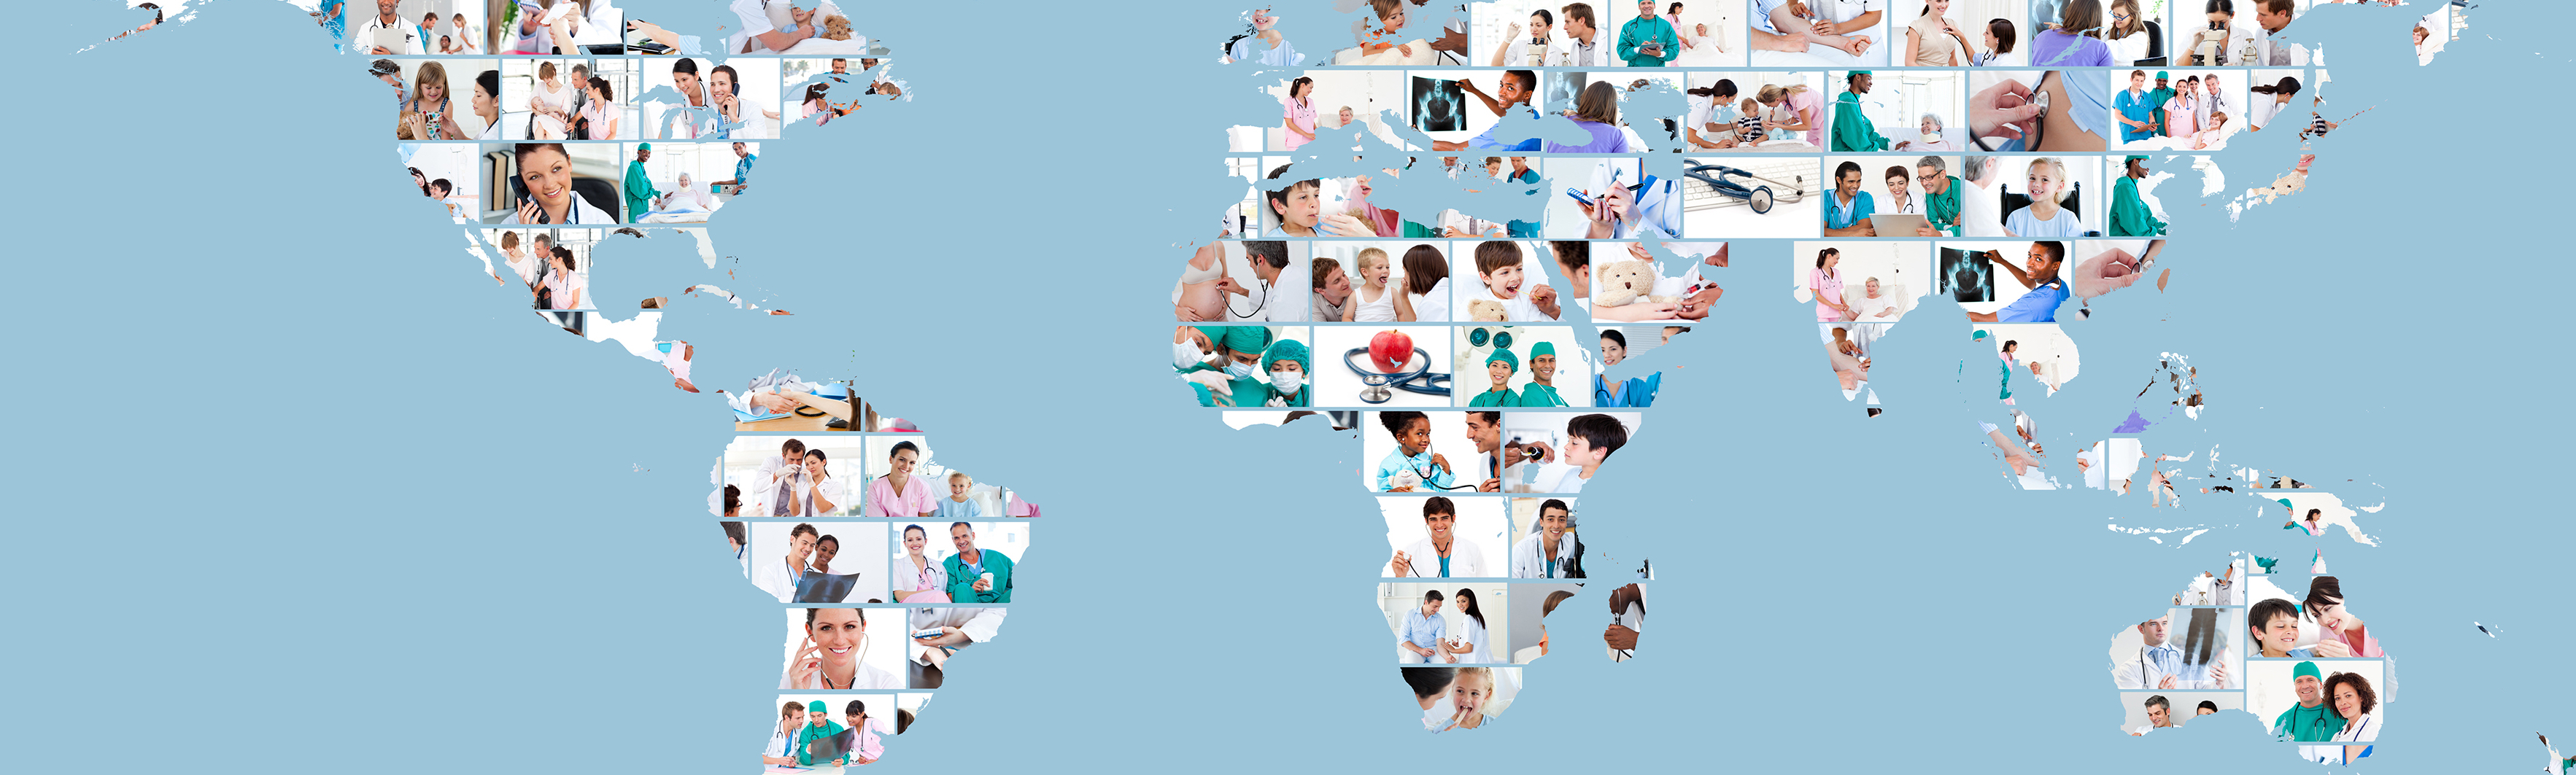 World map with healthcare workers